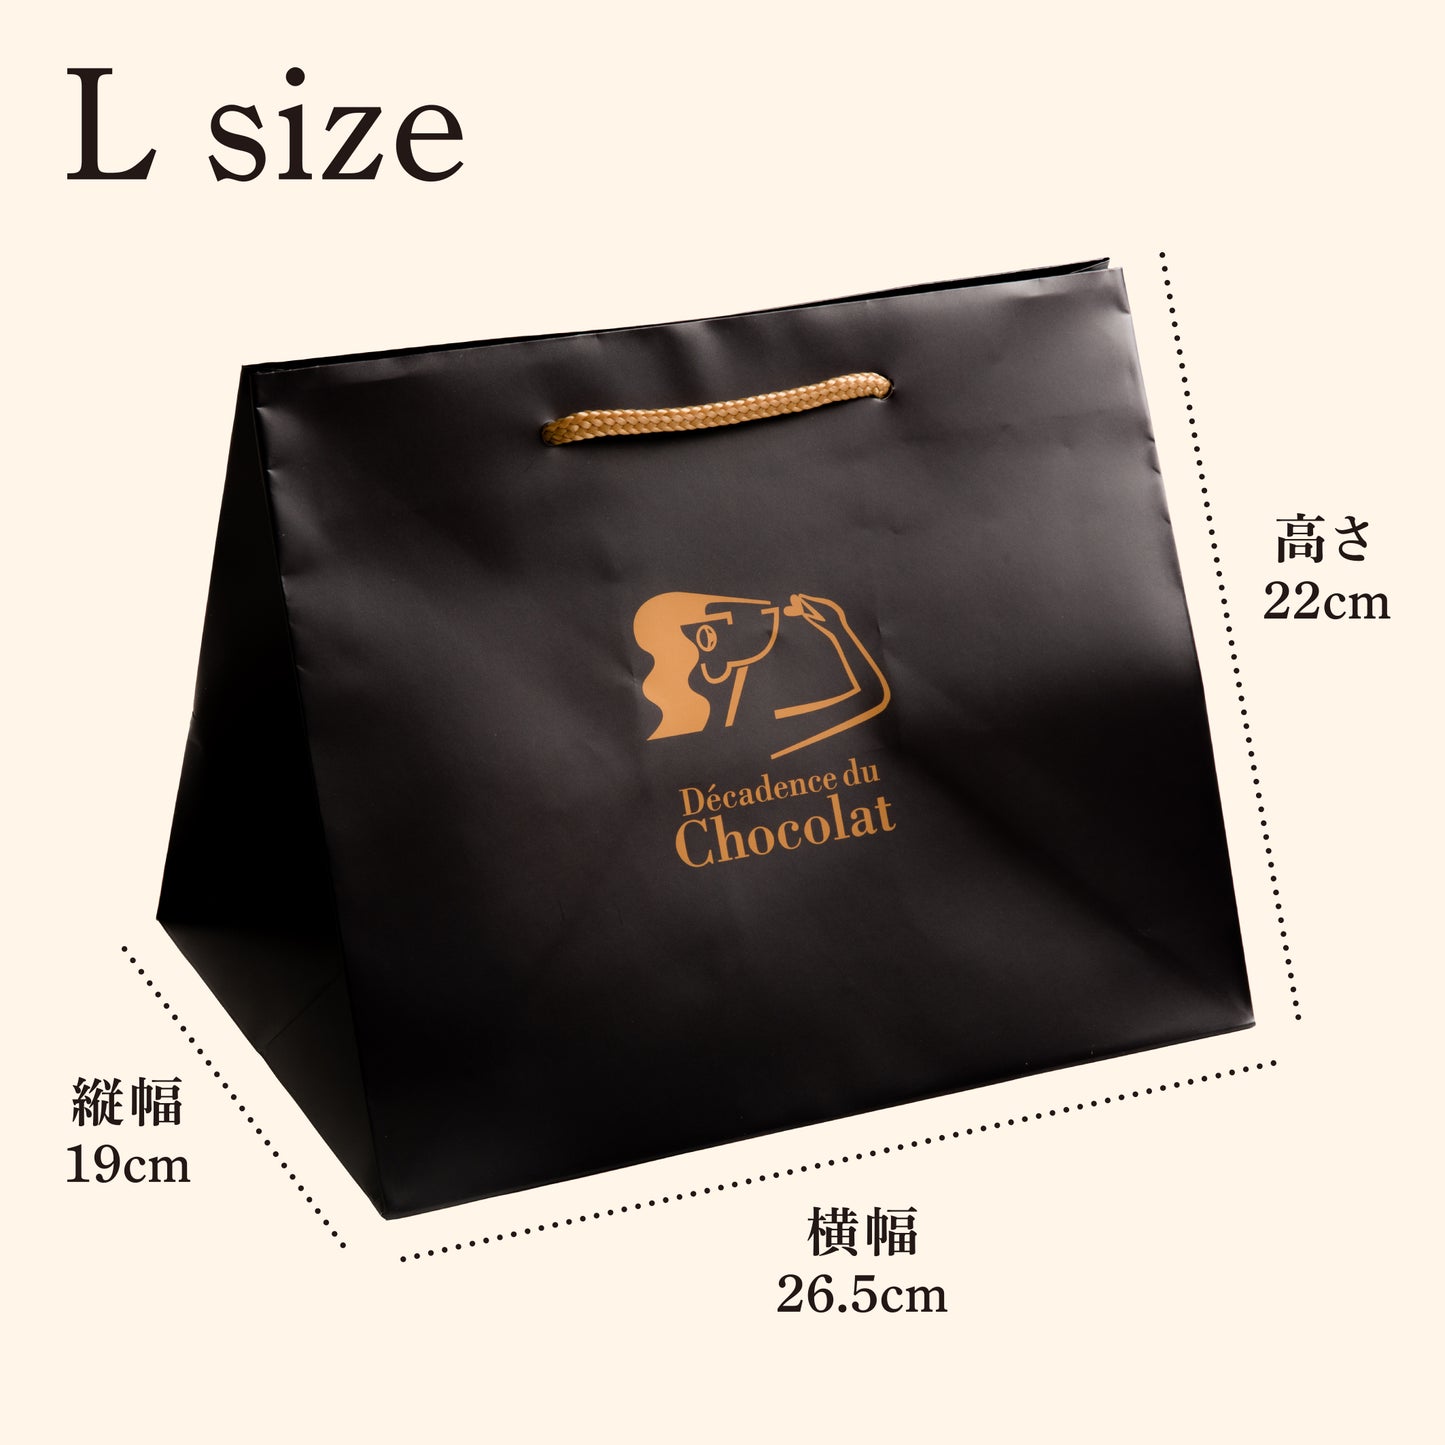 Paper bag with logo (L size)